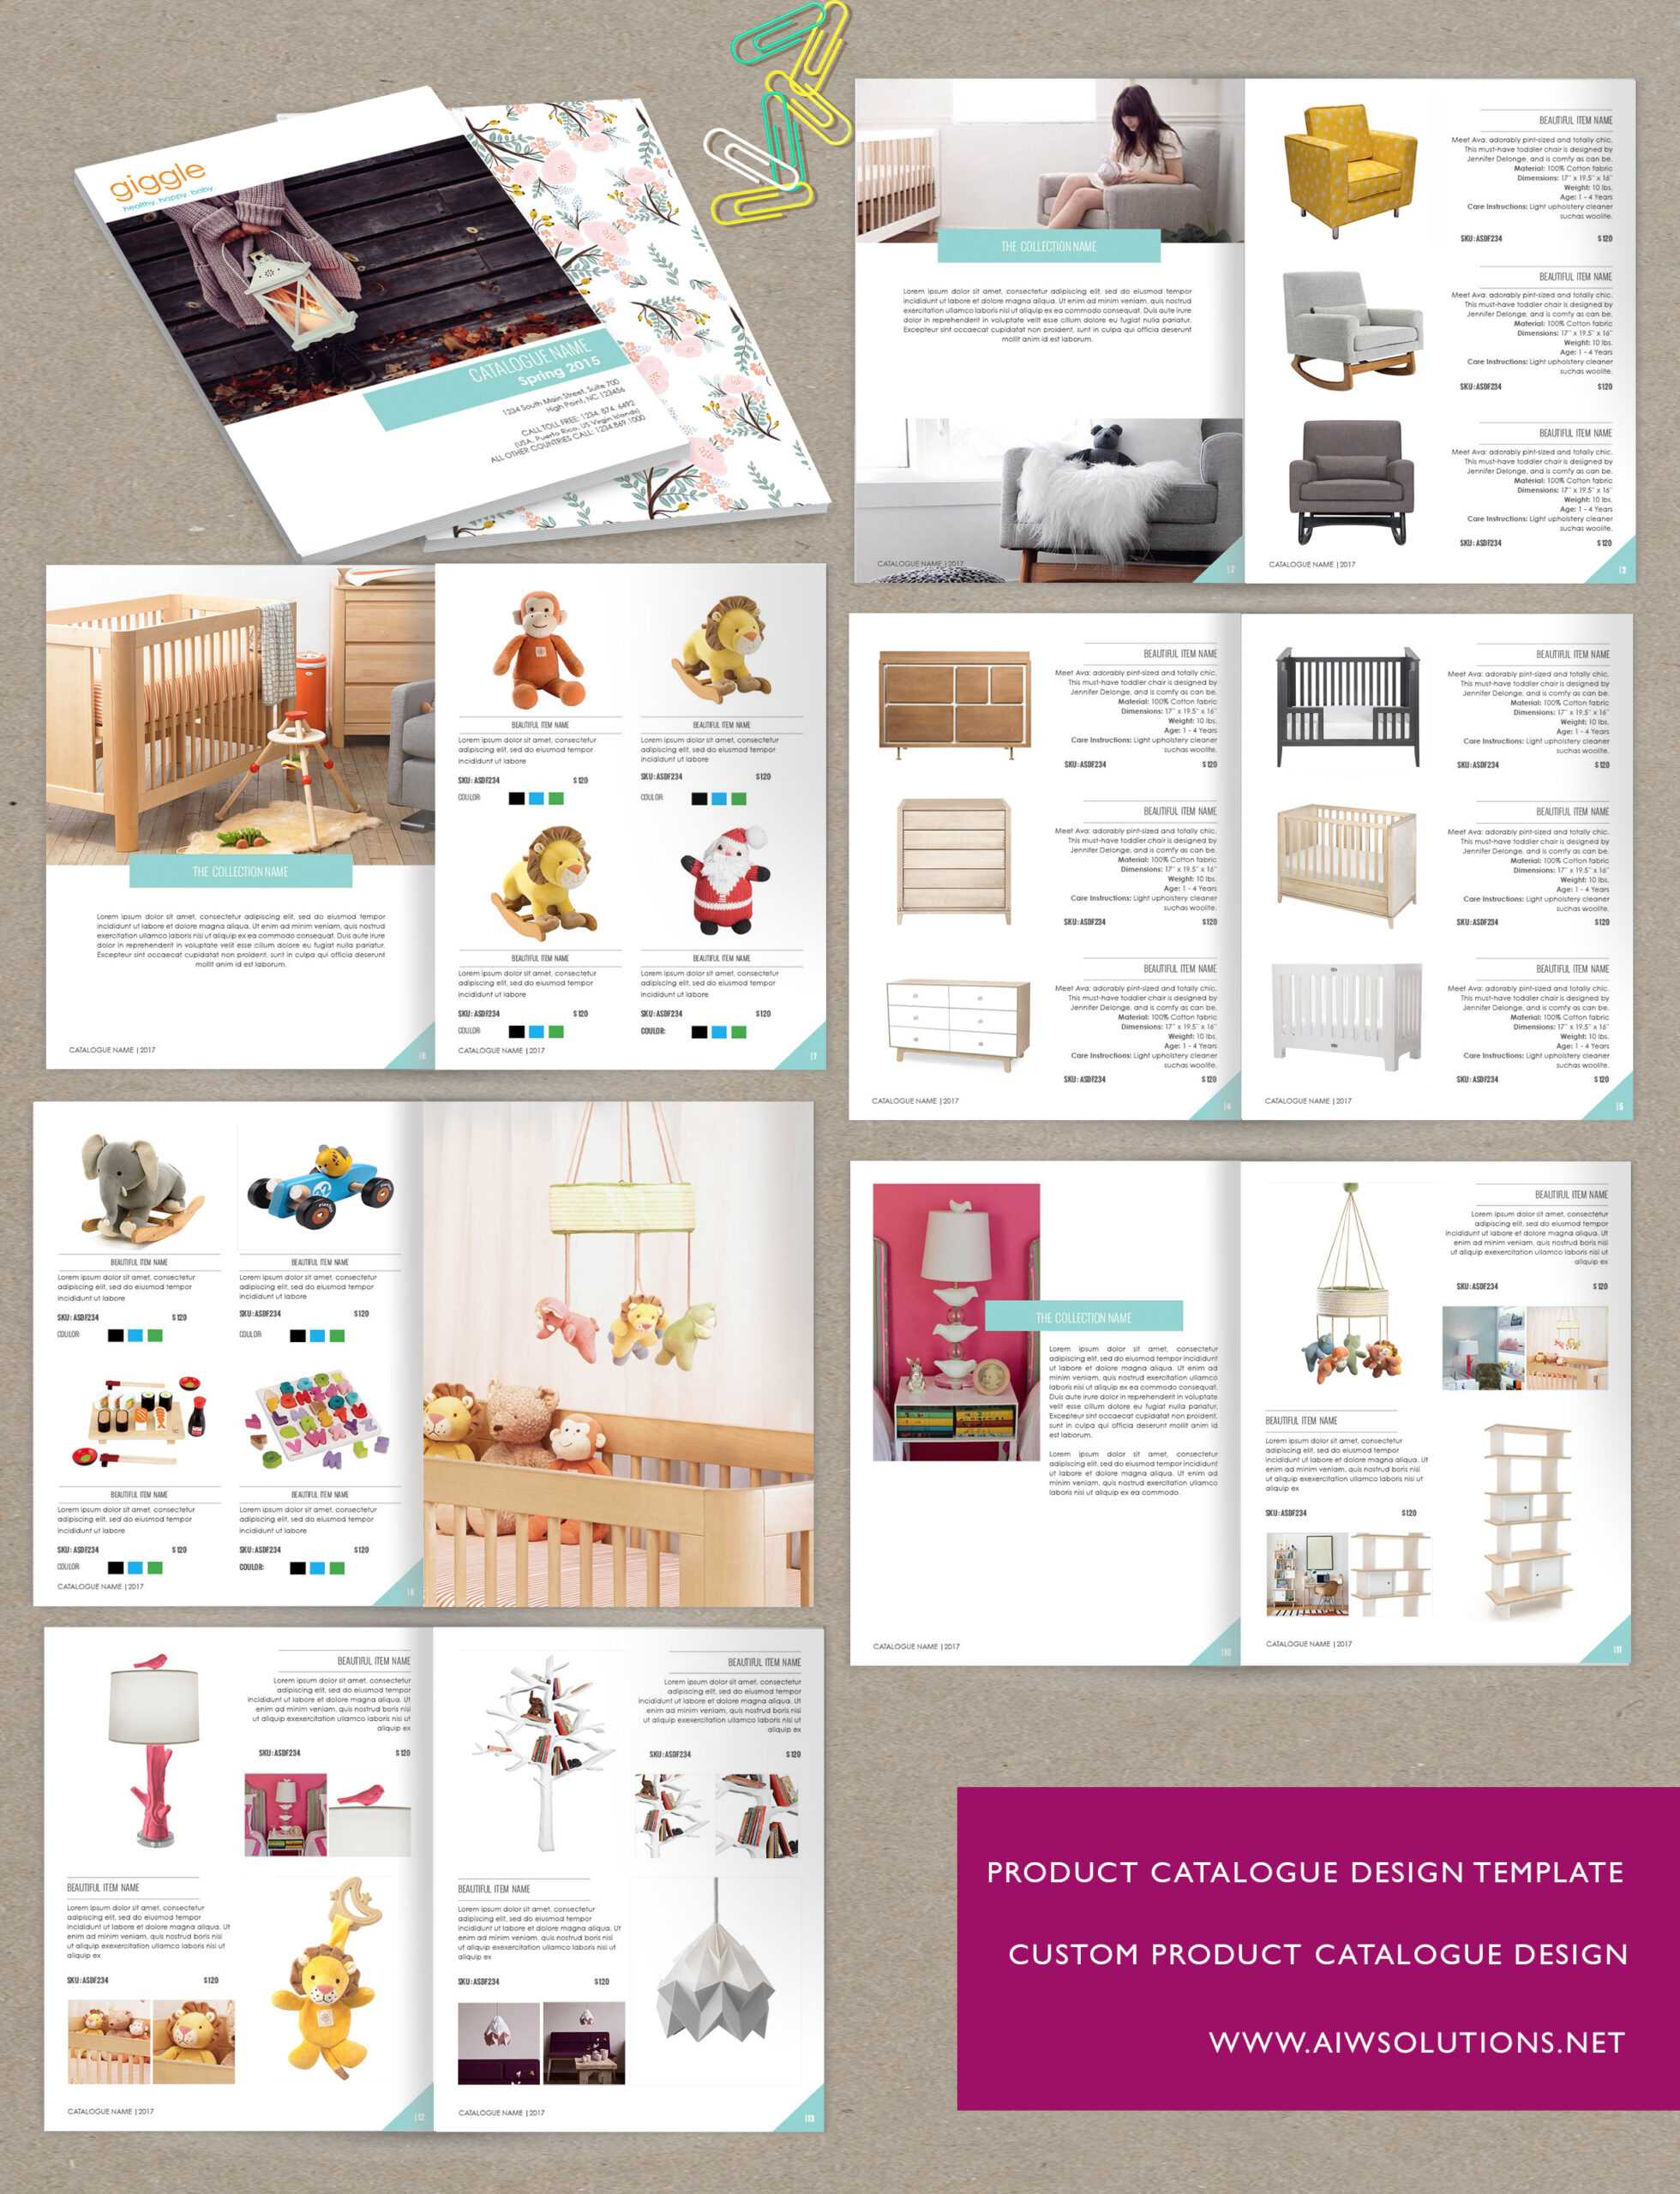 Wholesale Catalog Template Id05 Throughout Catalogue Word Template